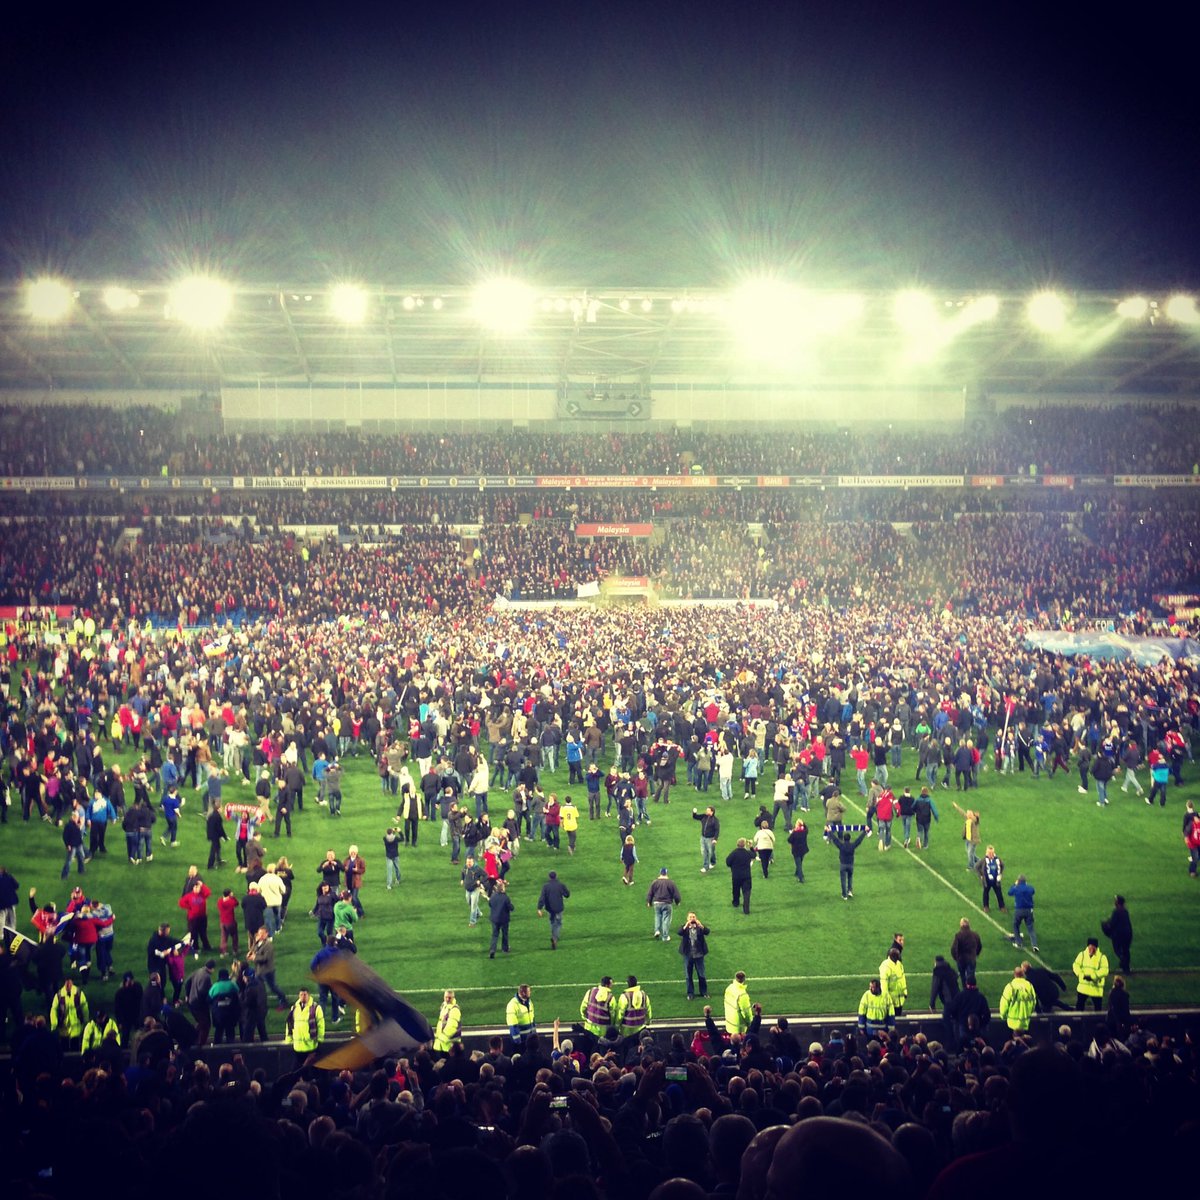 That night against Charlton ... didn’t stop celebrating for a week #TenYearsAtCCS